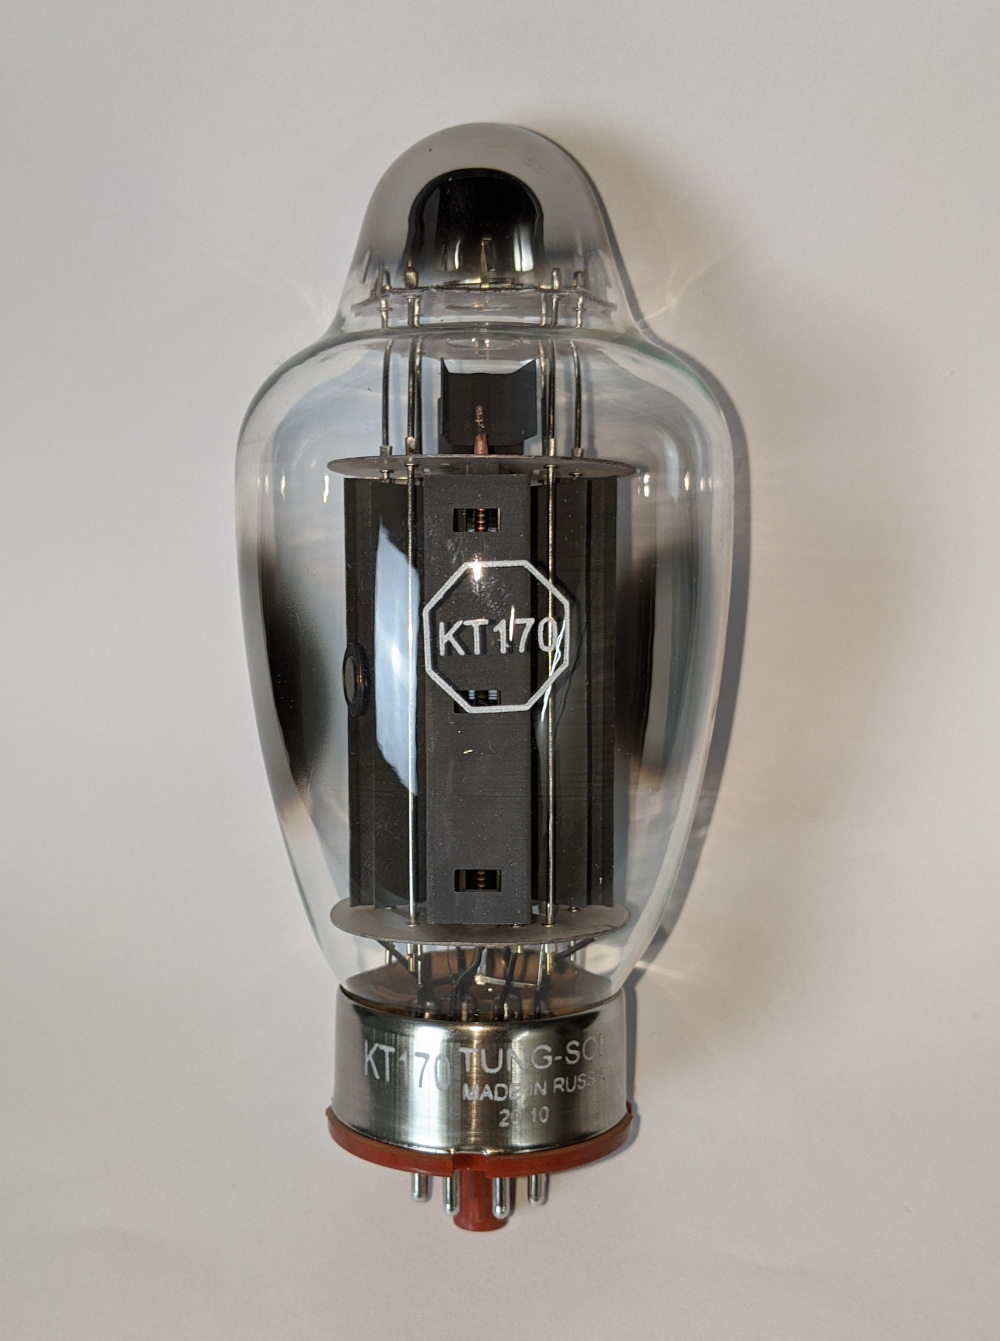 Tube / valve KT170 Tungsol matched